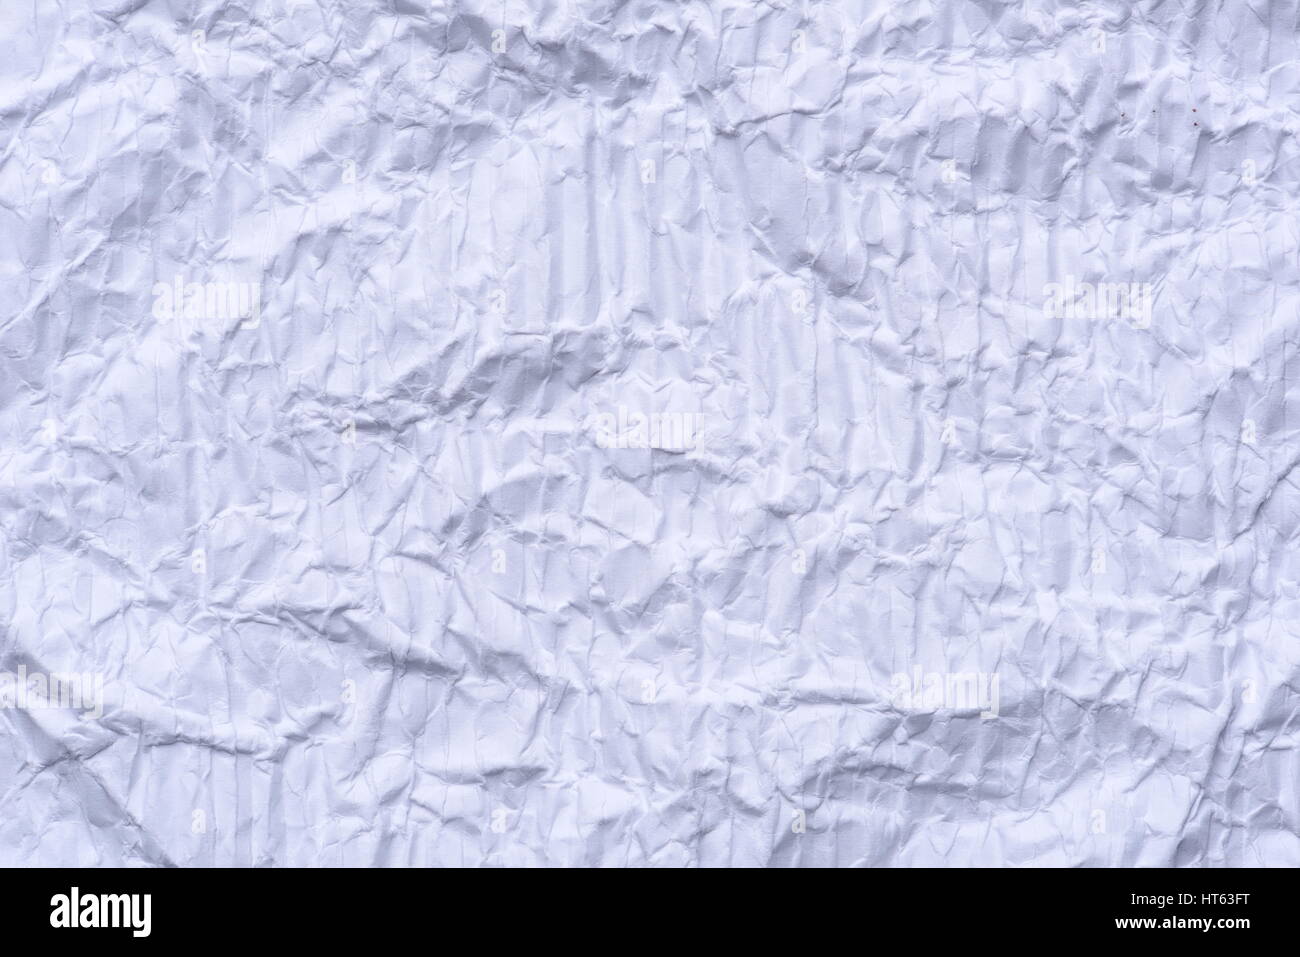 Wrinkled white paper texture Stock Photo